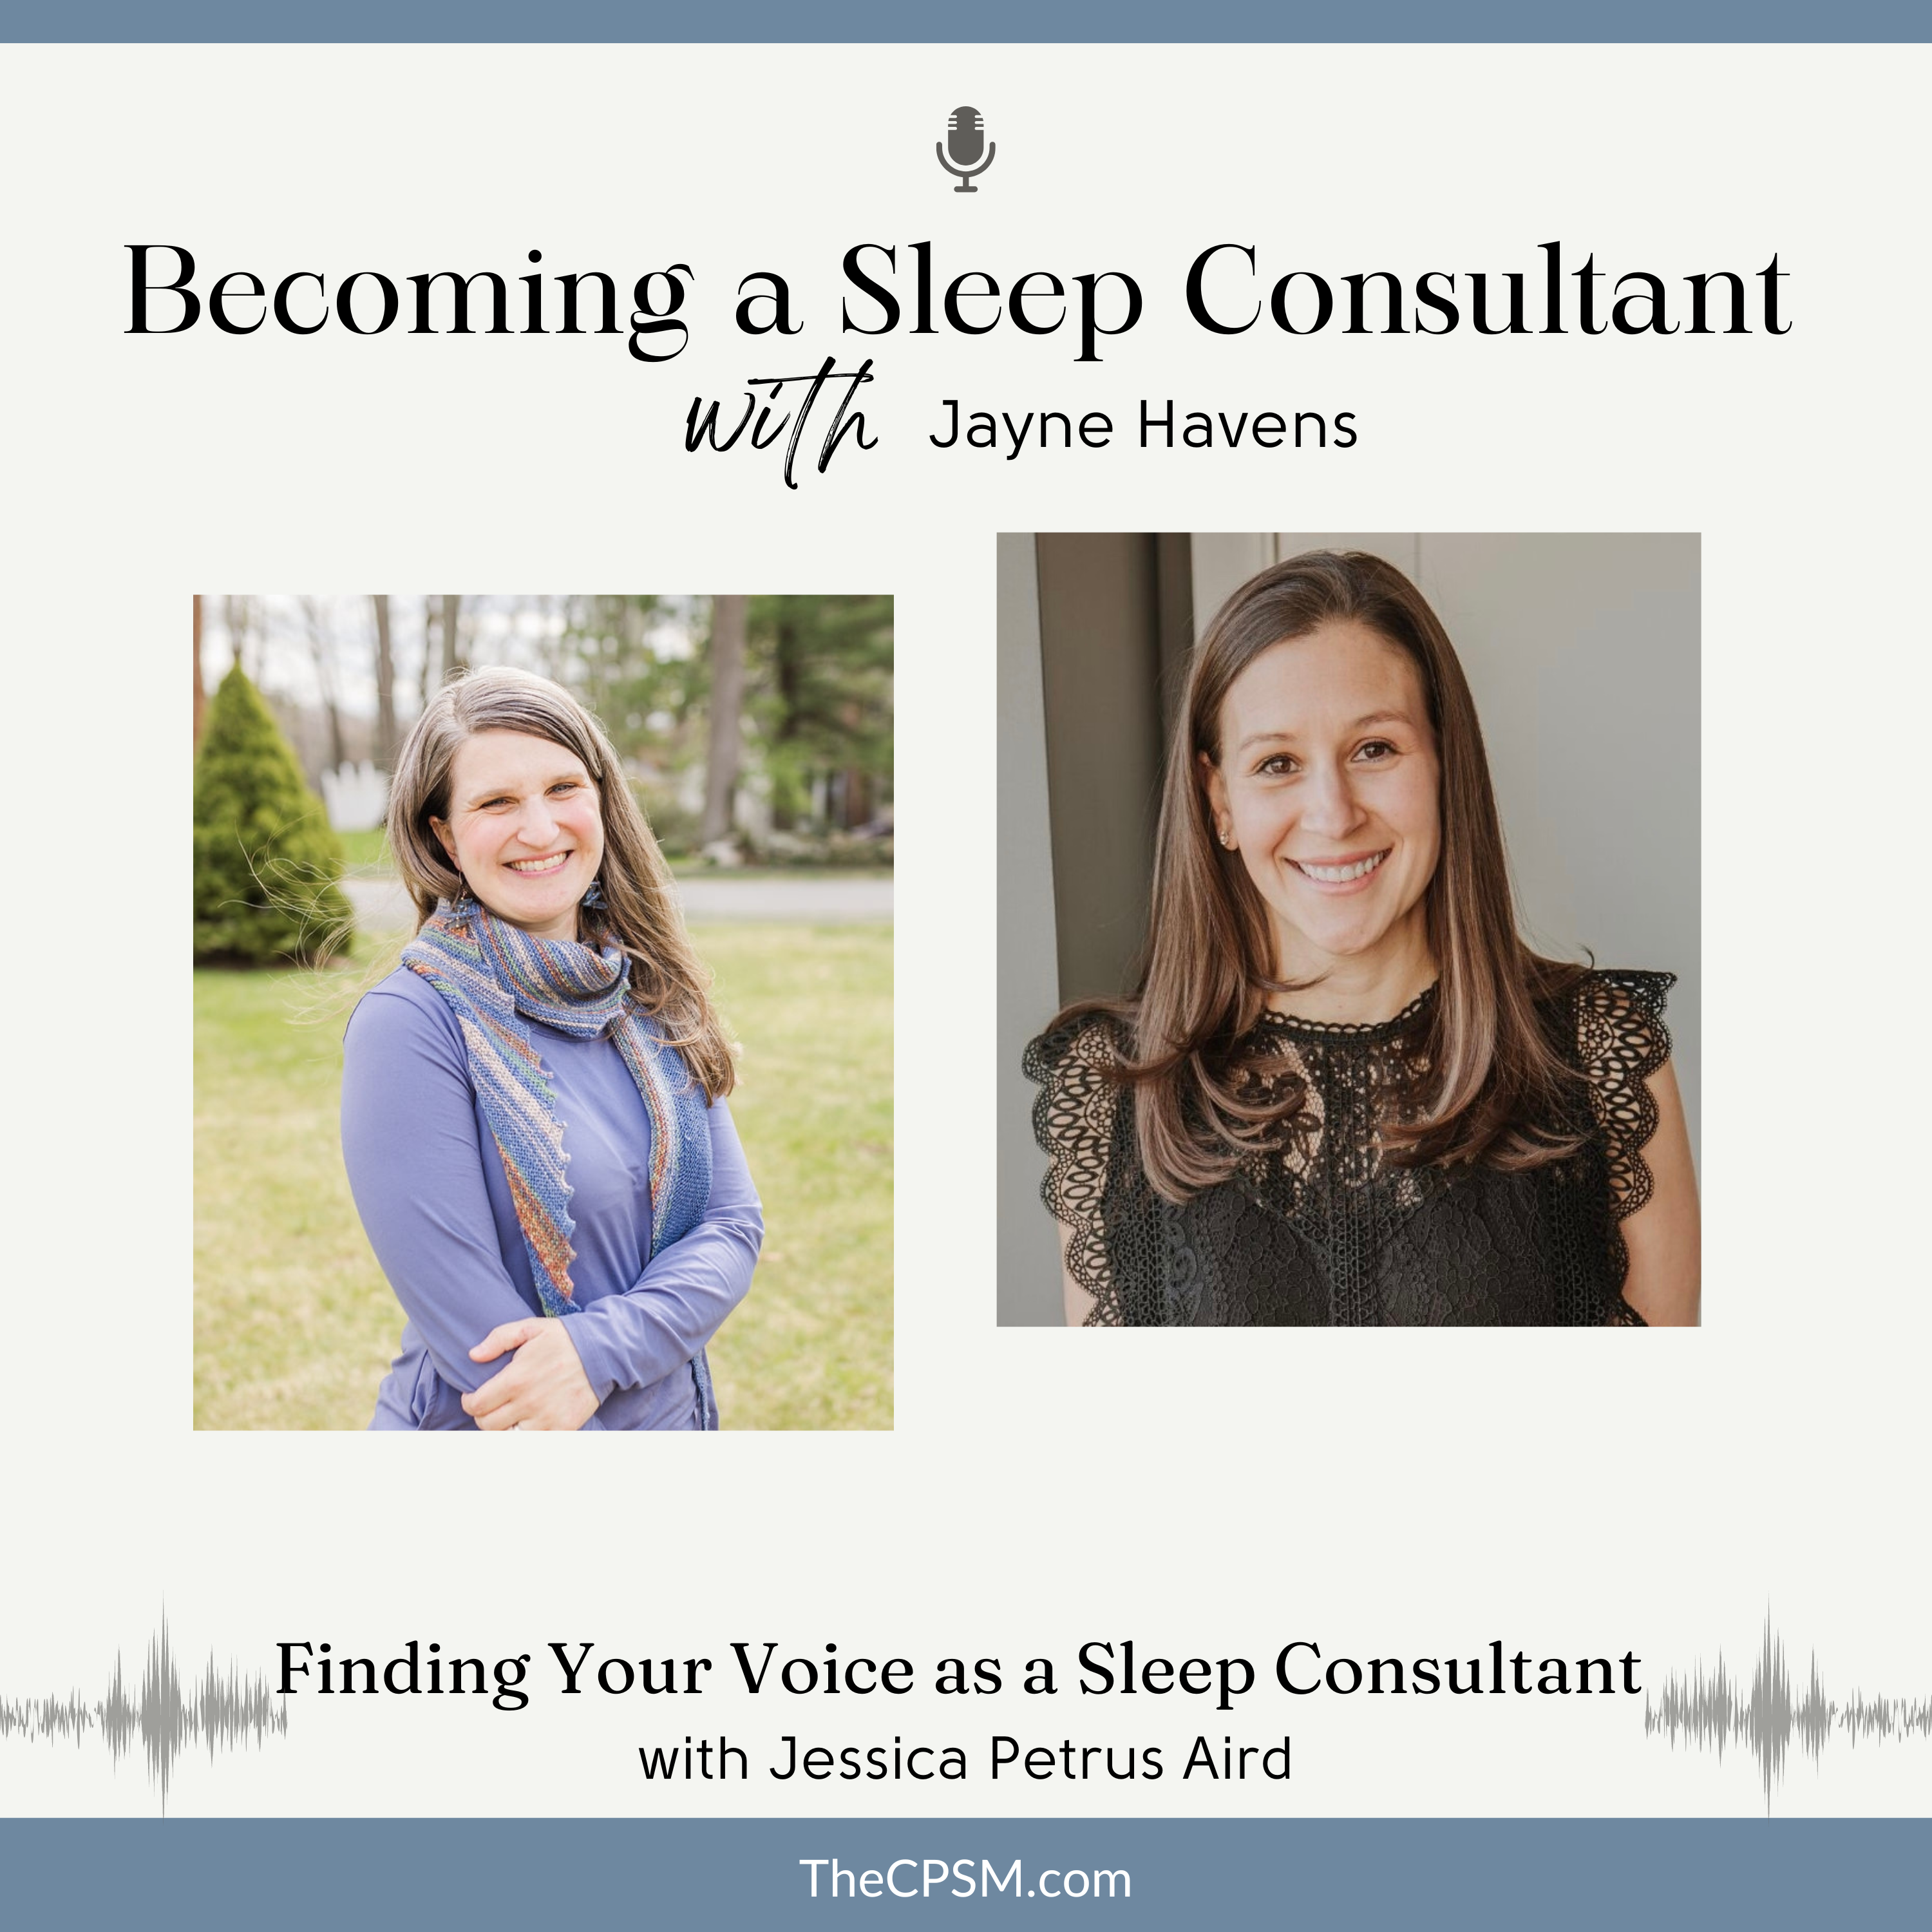 Finding Your Voice as a Sleep Consultant with Jessica Petrus Aird